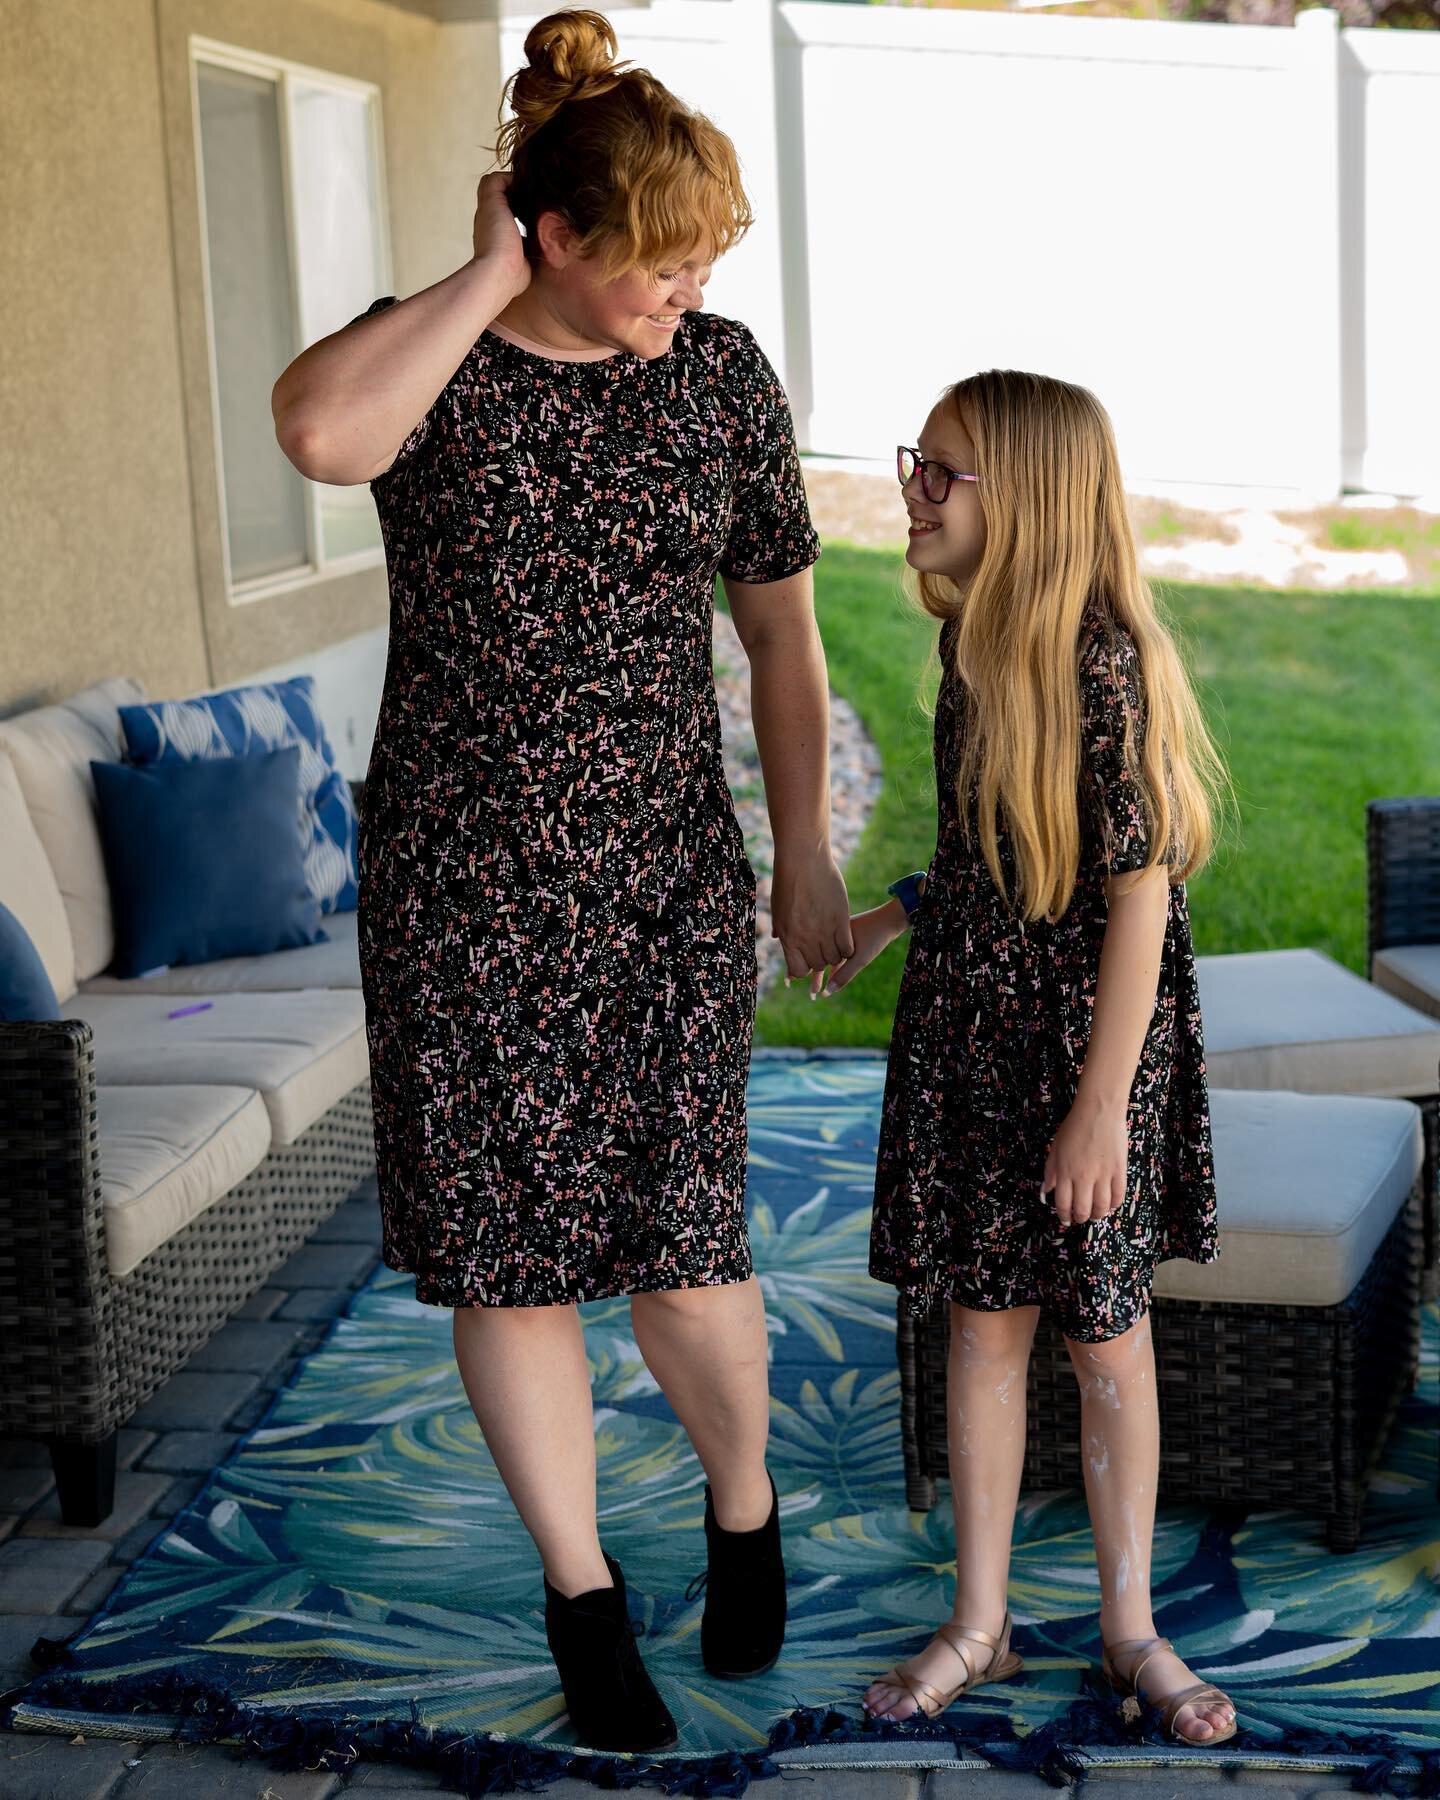 Twinners!! Look at us in our matchy-matchy dresses! 💖

This is the Sally Floral Rib in black/pink from @milymaefabrics and it is super soft and so nice to wear.

After making my dress, I had just enough leftover to make Ivy a dress, so she gets a su